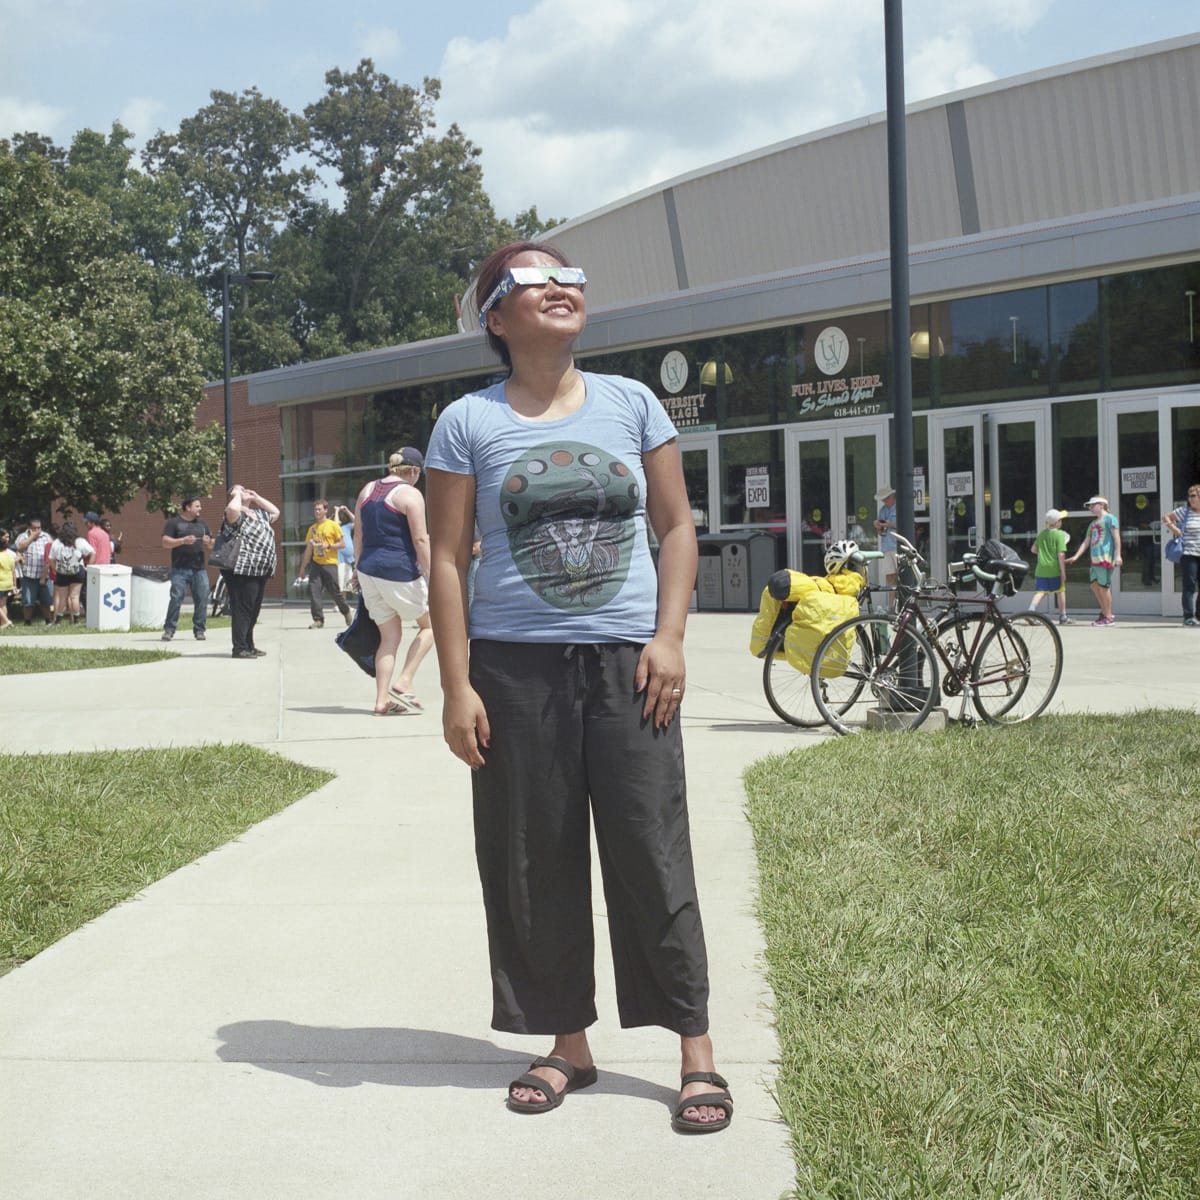 An analog portrait of a woman watching the solar eclipse at SIU in Carbondale, Illinois